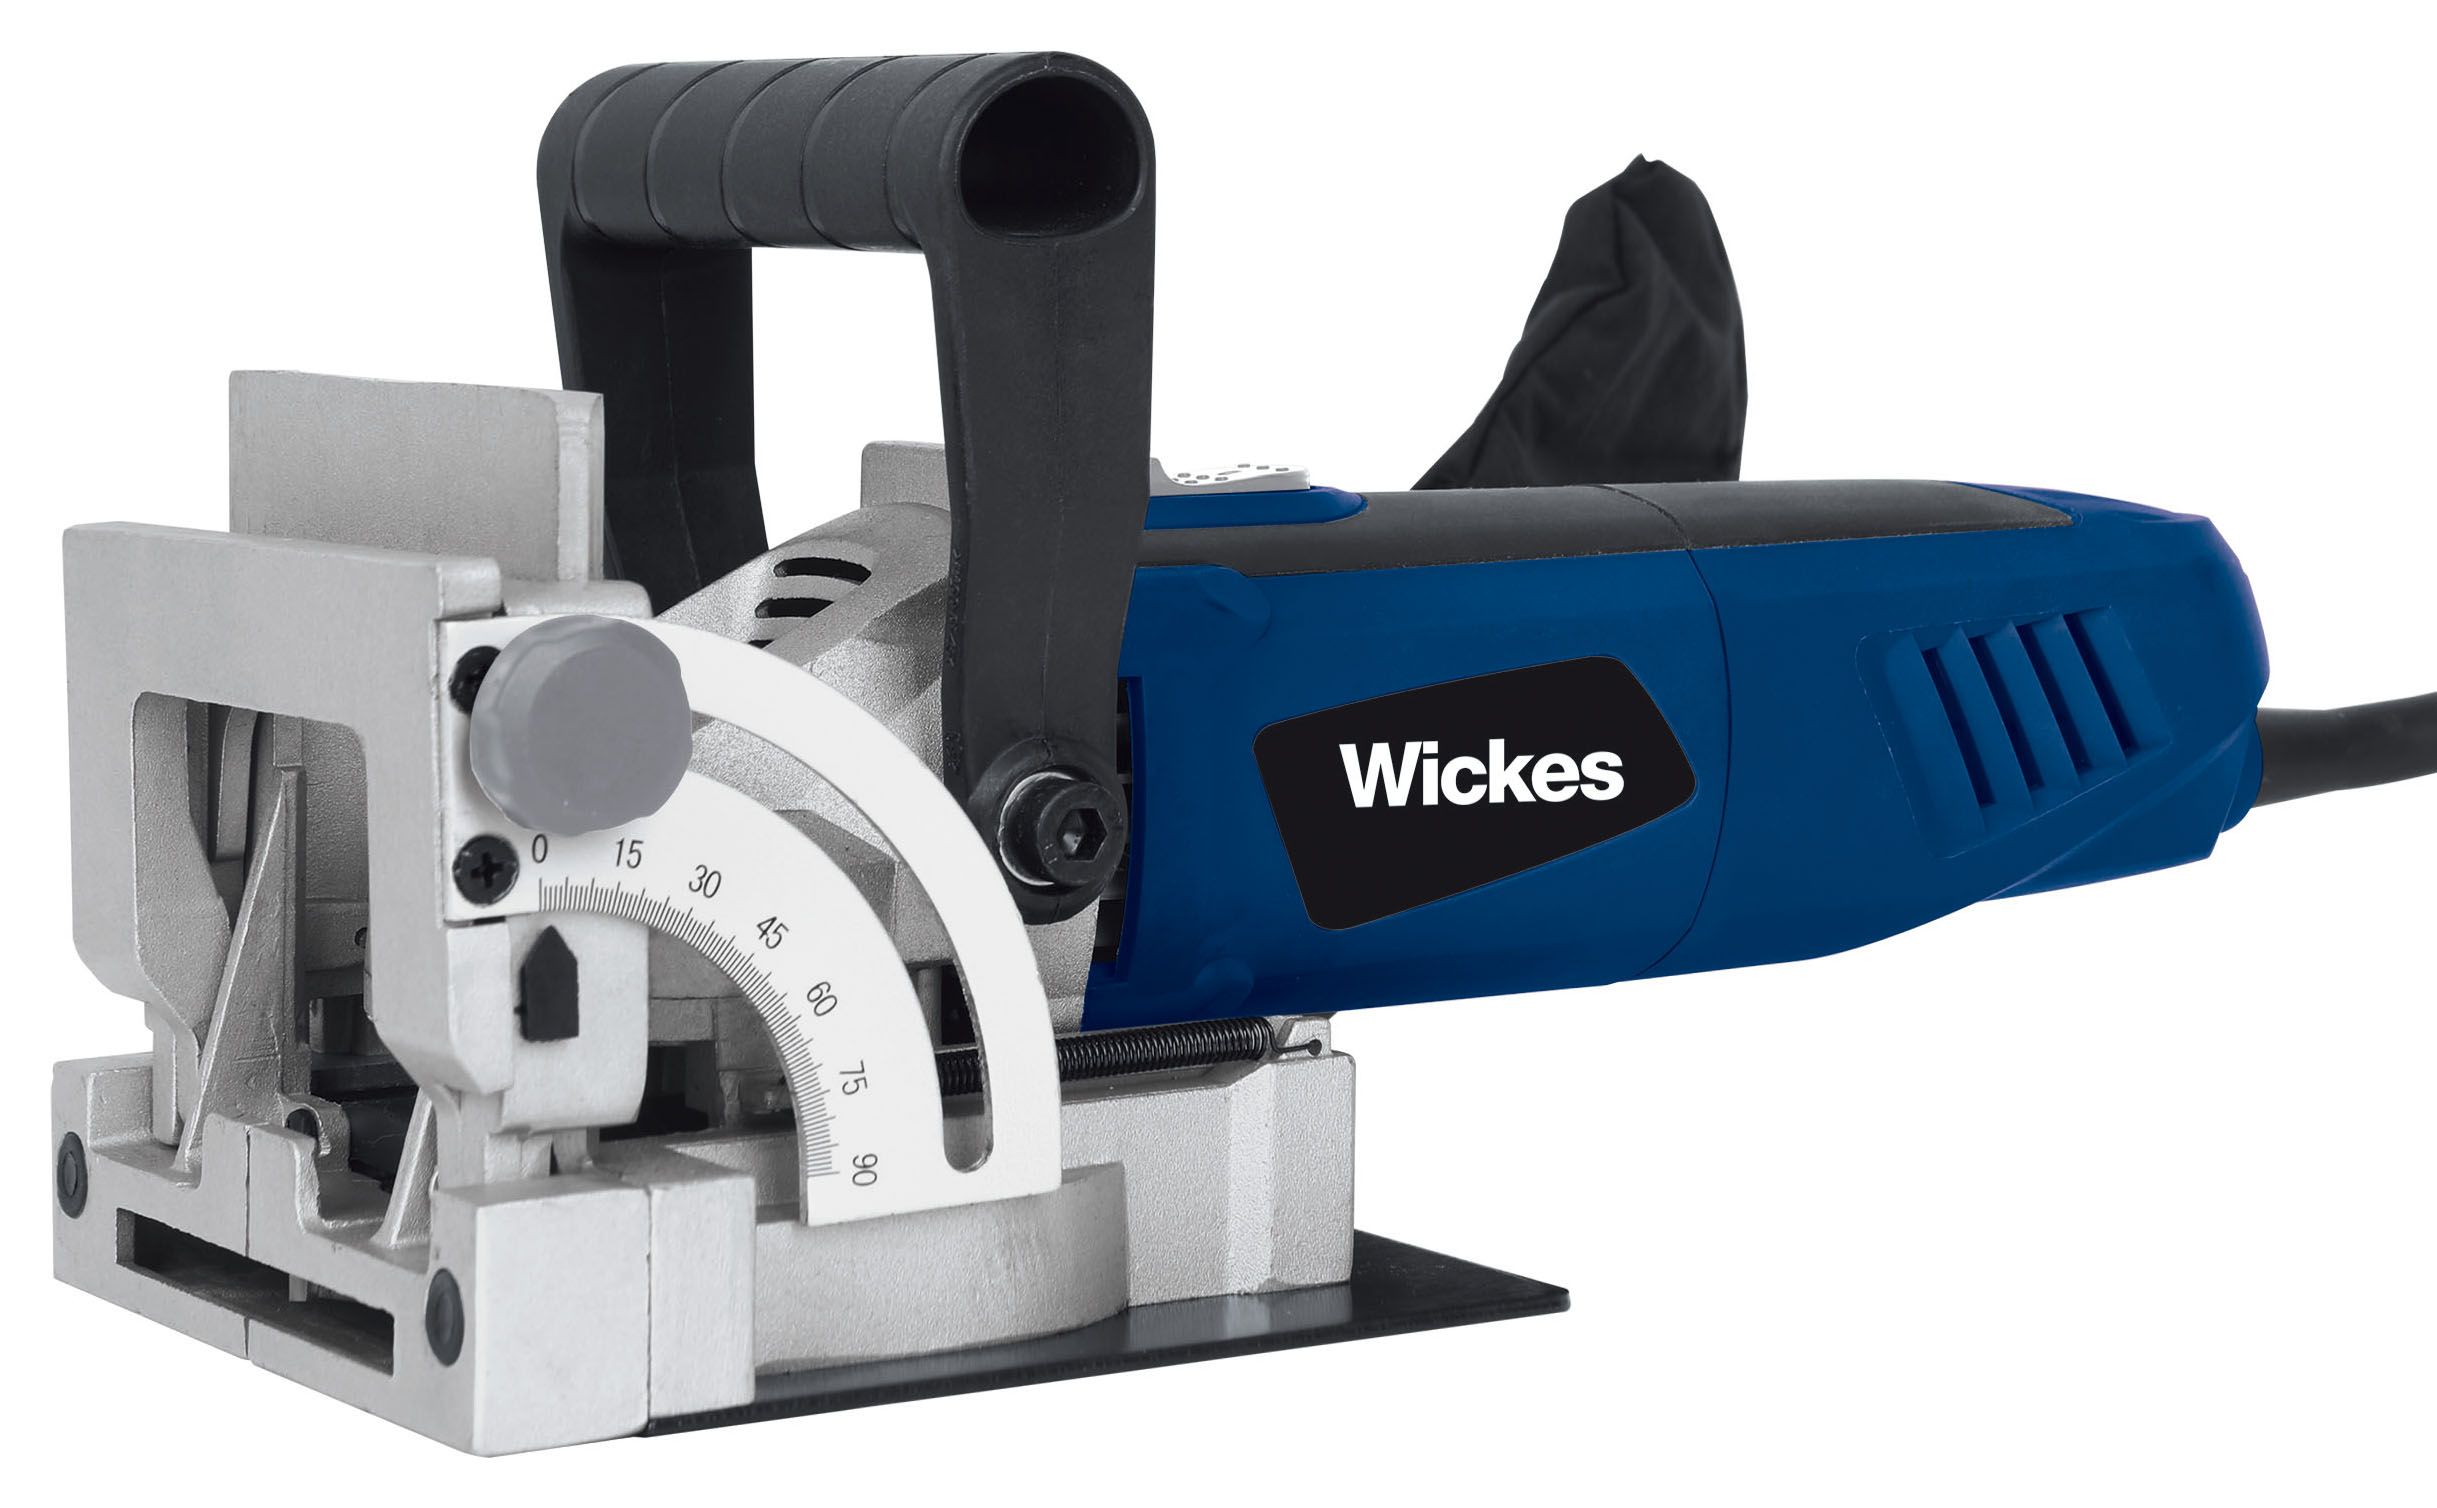 Wickes Corded Biscuit Jointer - 860W